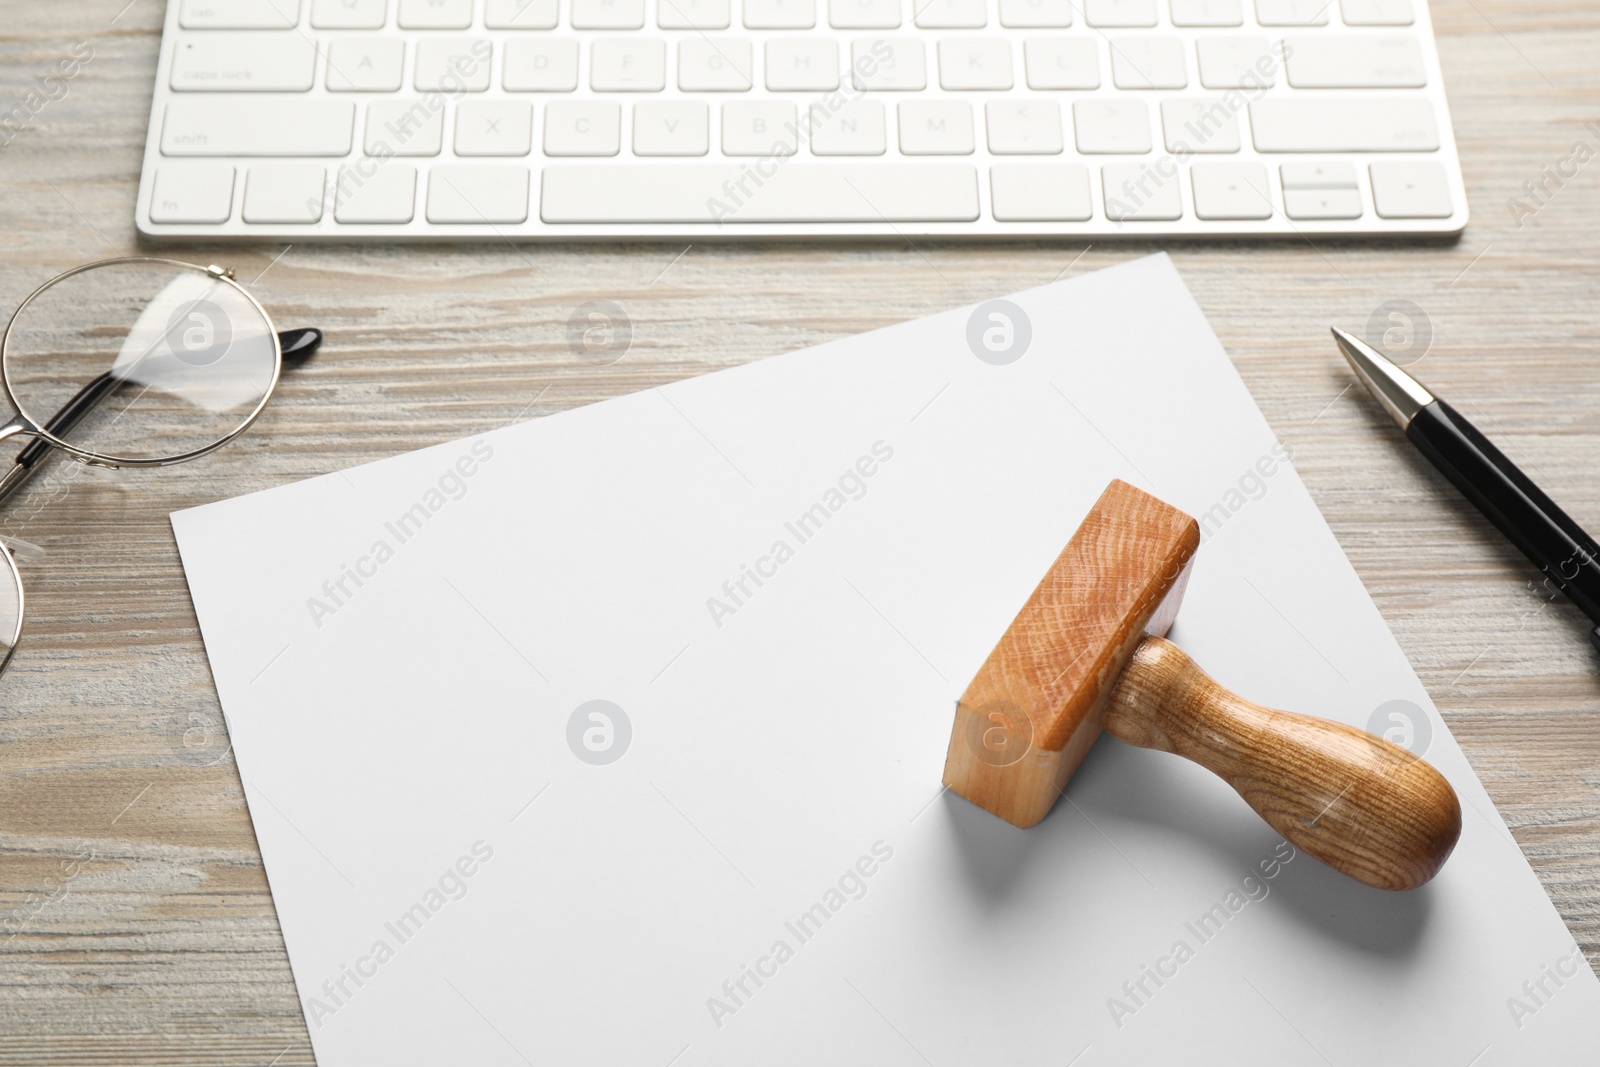 Photo of Blank sheet of paper, pen, glasses, keyboard and stamp on wooden table